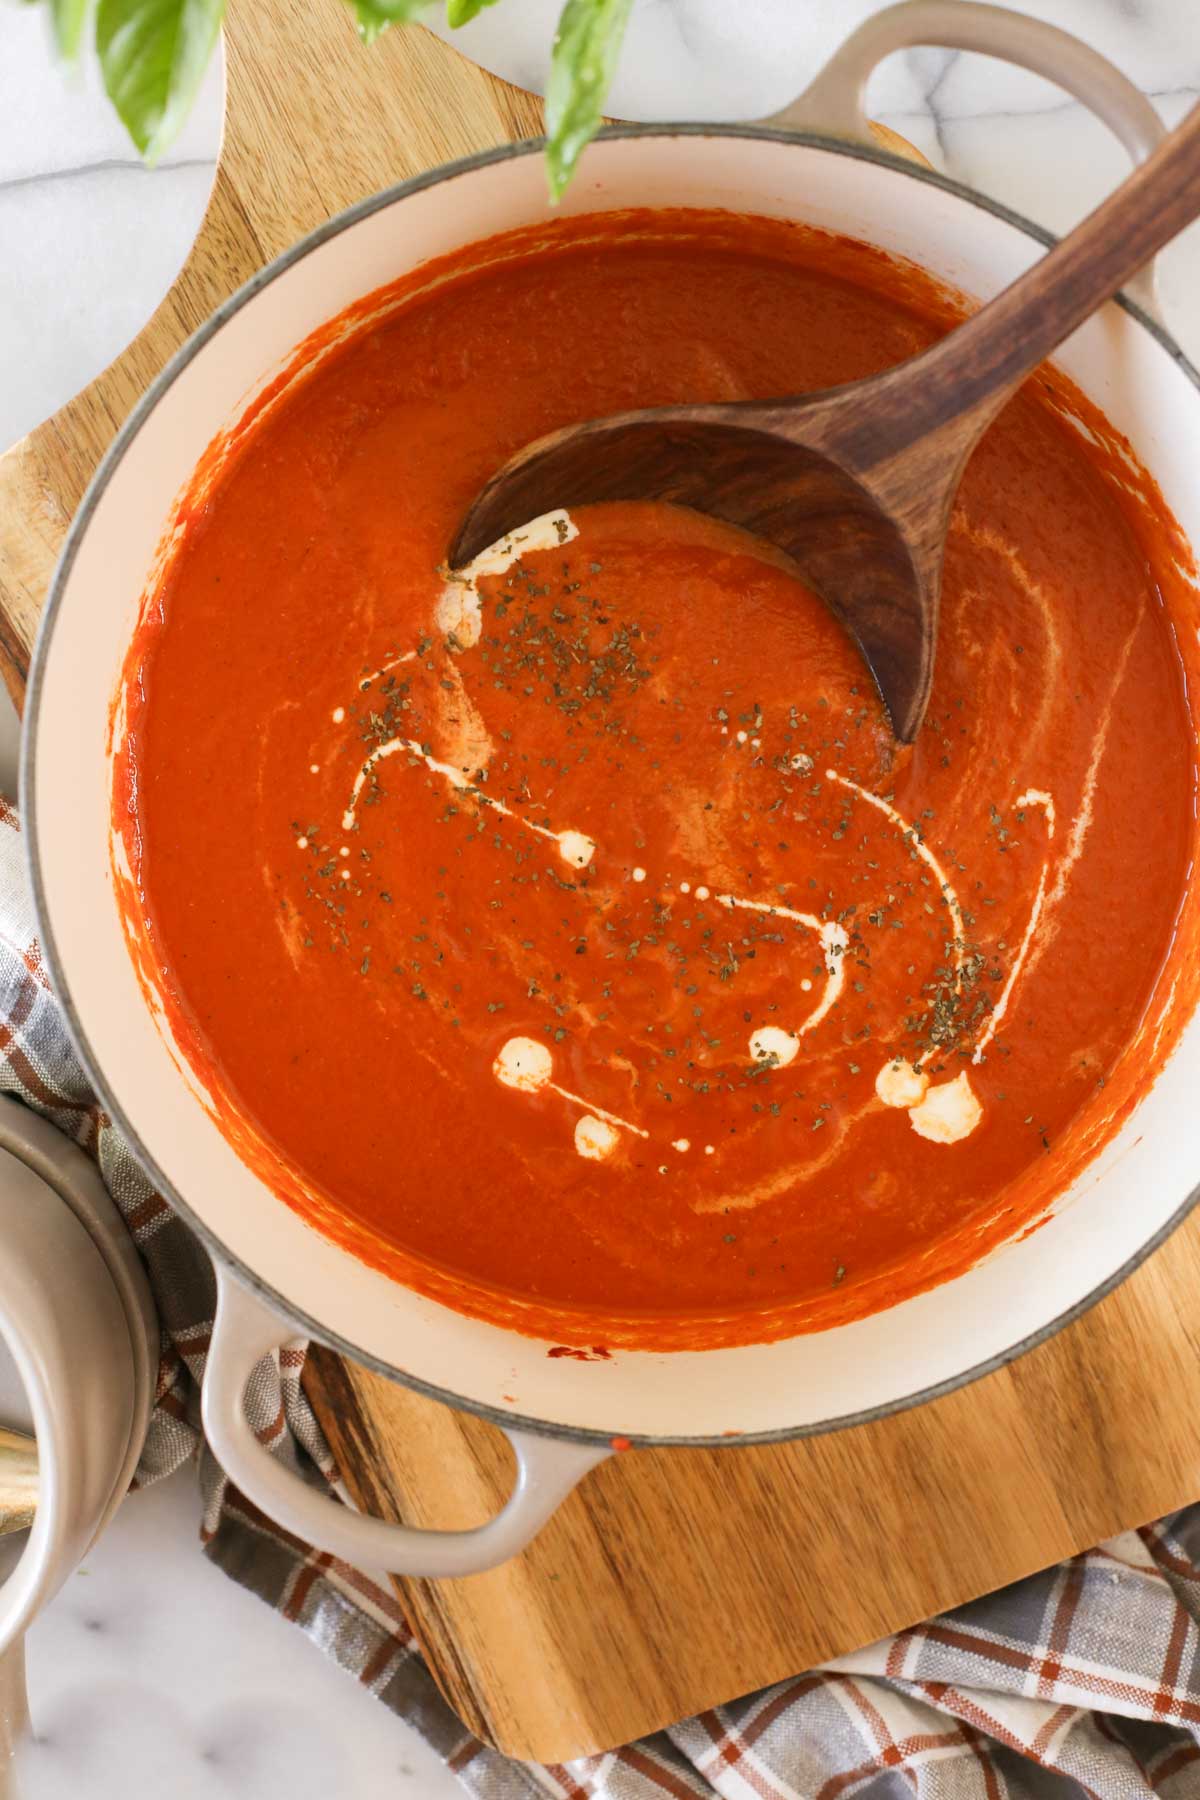 Overhead shot of a pot of Creamy Balsamic Tomato Soup with a wood serving spoon in it, sitting on wood cutting board.  